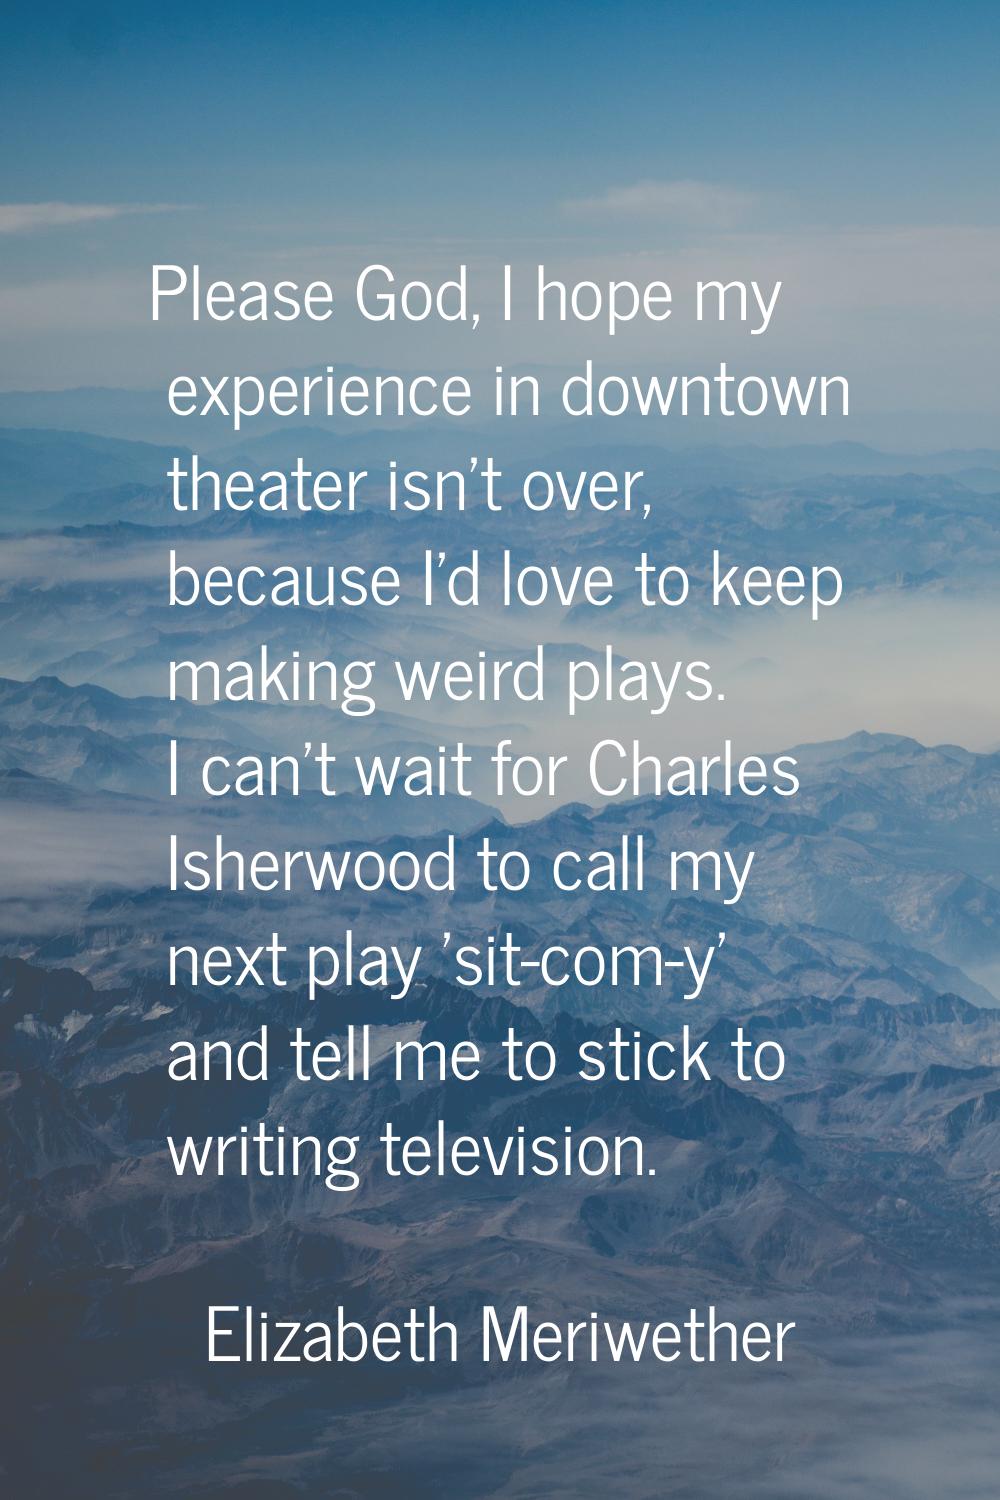 Please God, I hope my experience in downtown theater isn't over, because I'd love to keep making we